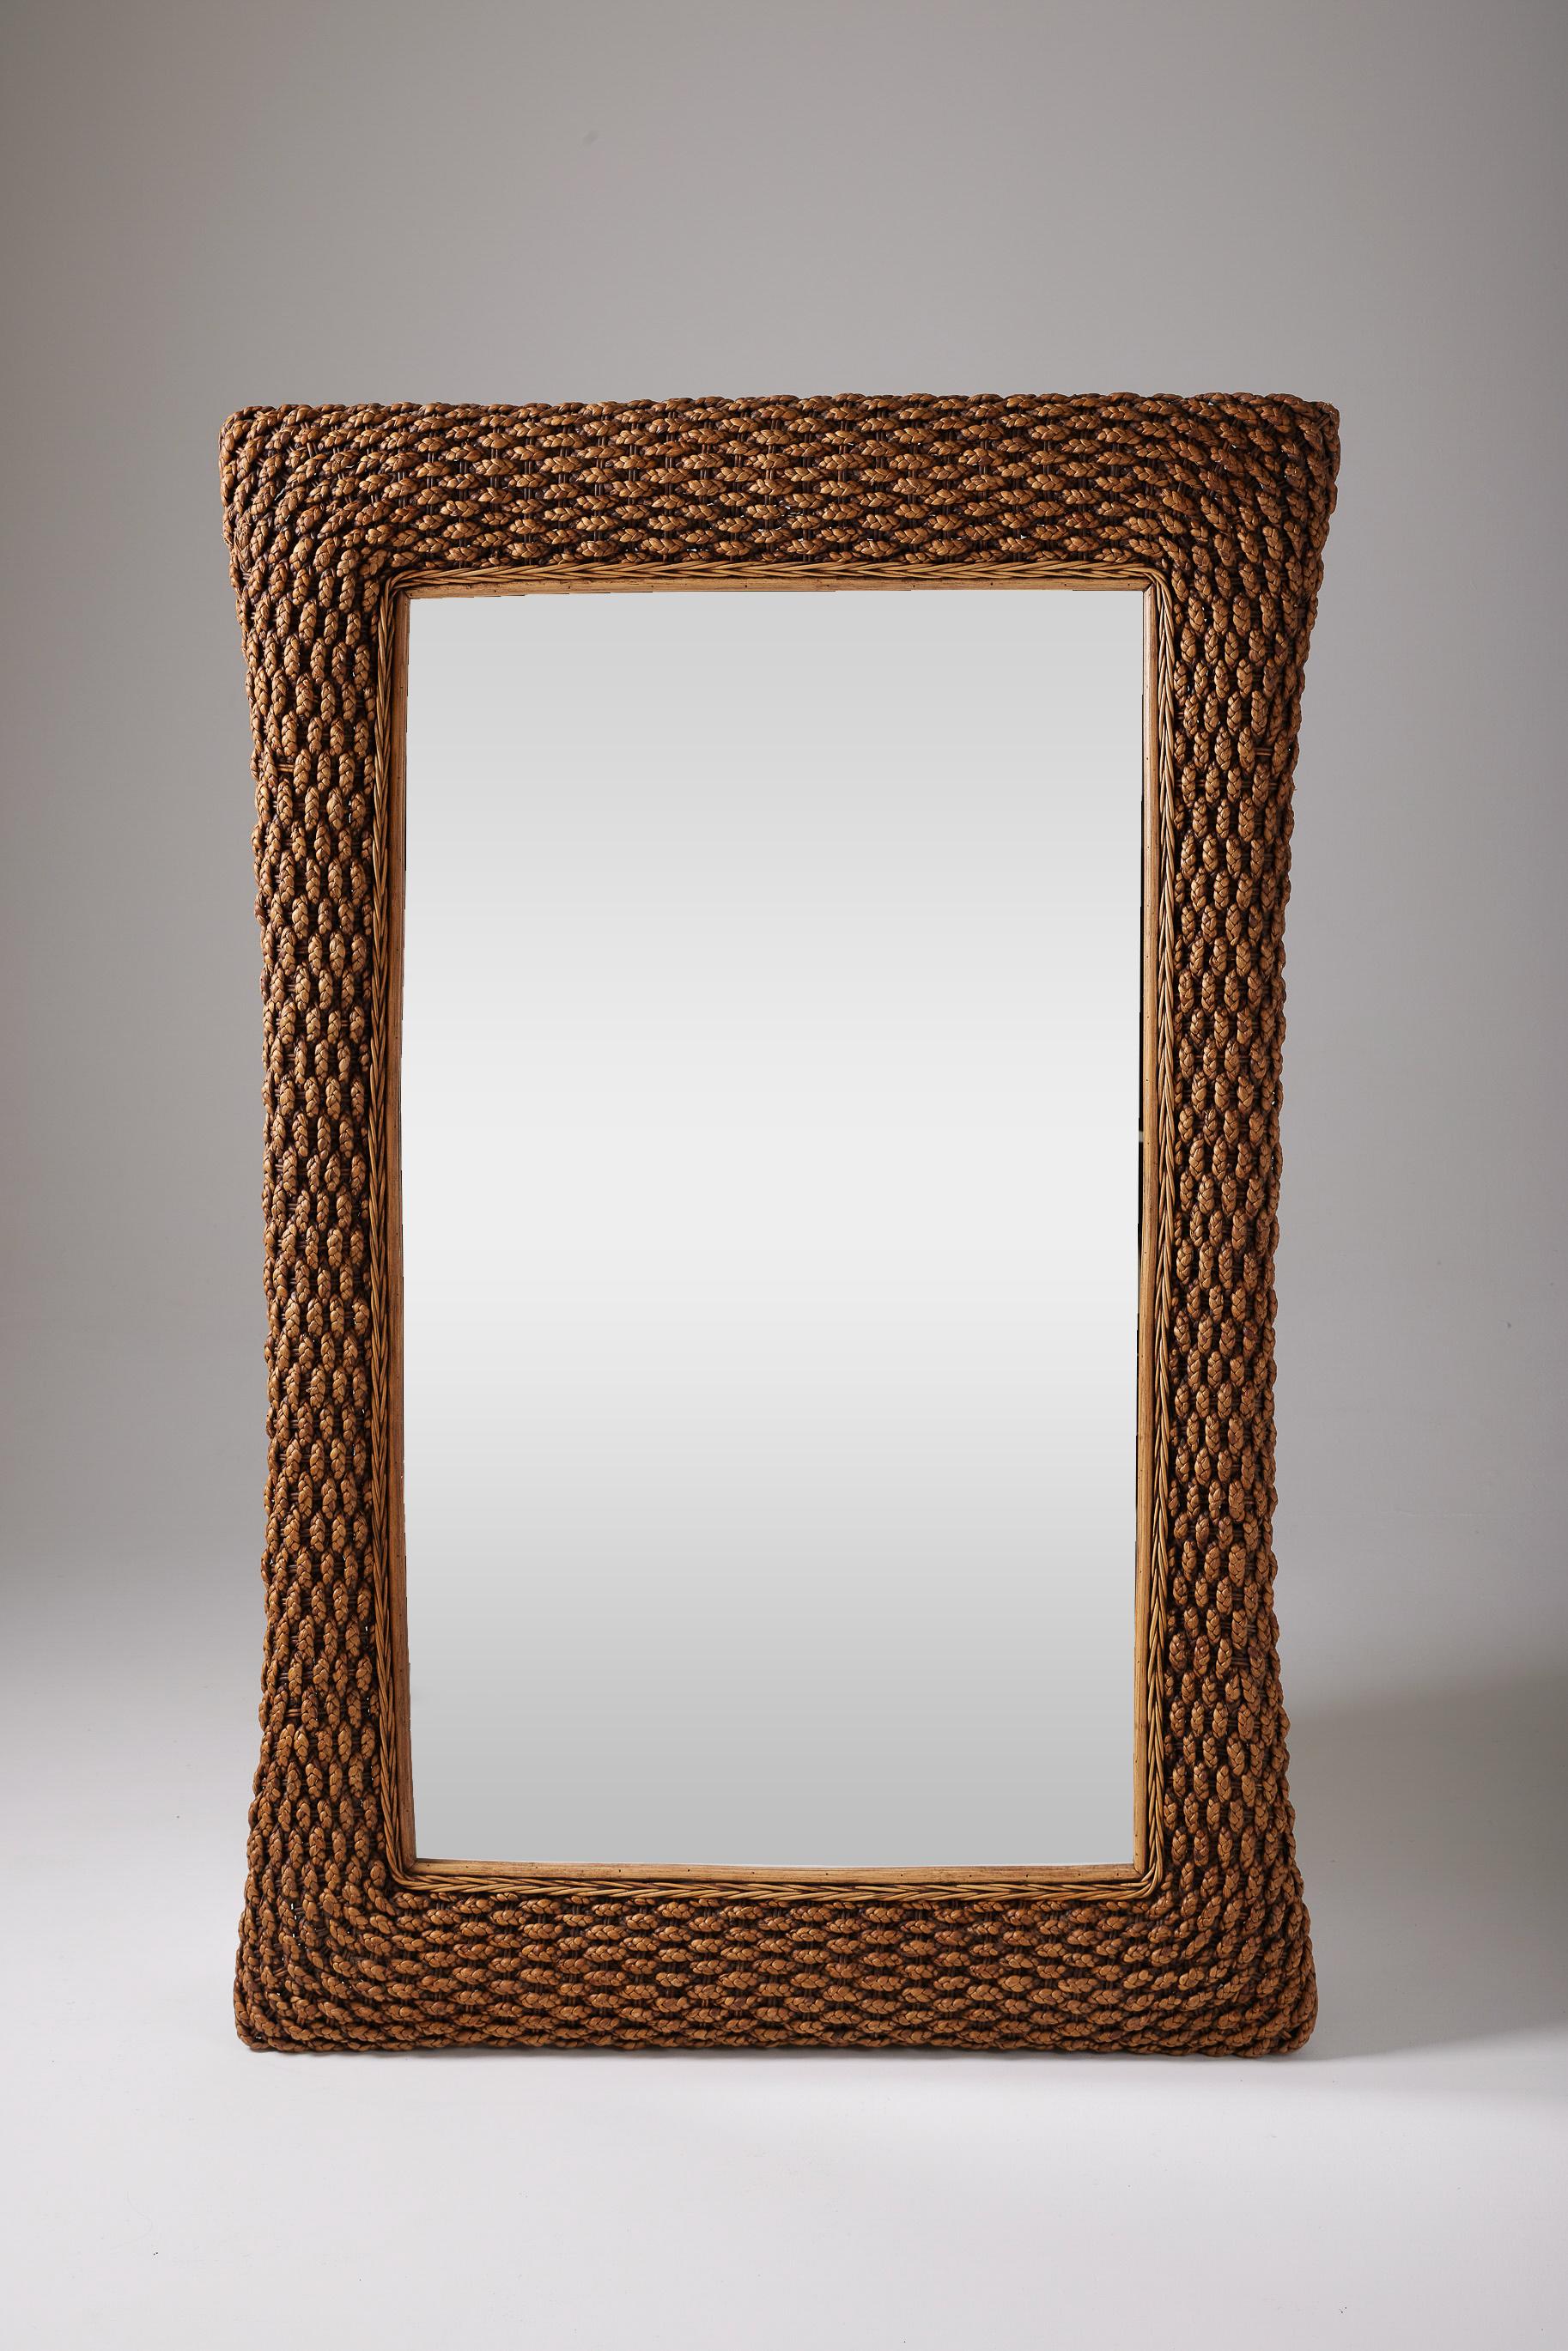 Large mirror with a woven water hyacinth frame in the 1970s style. Very good condition.
DV492